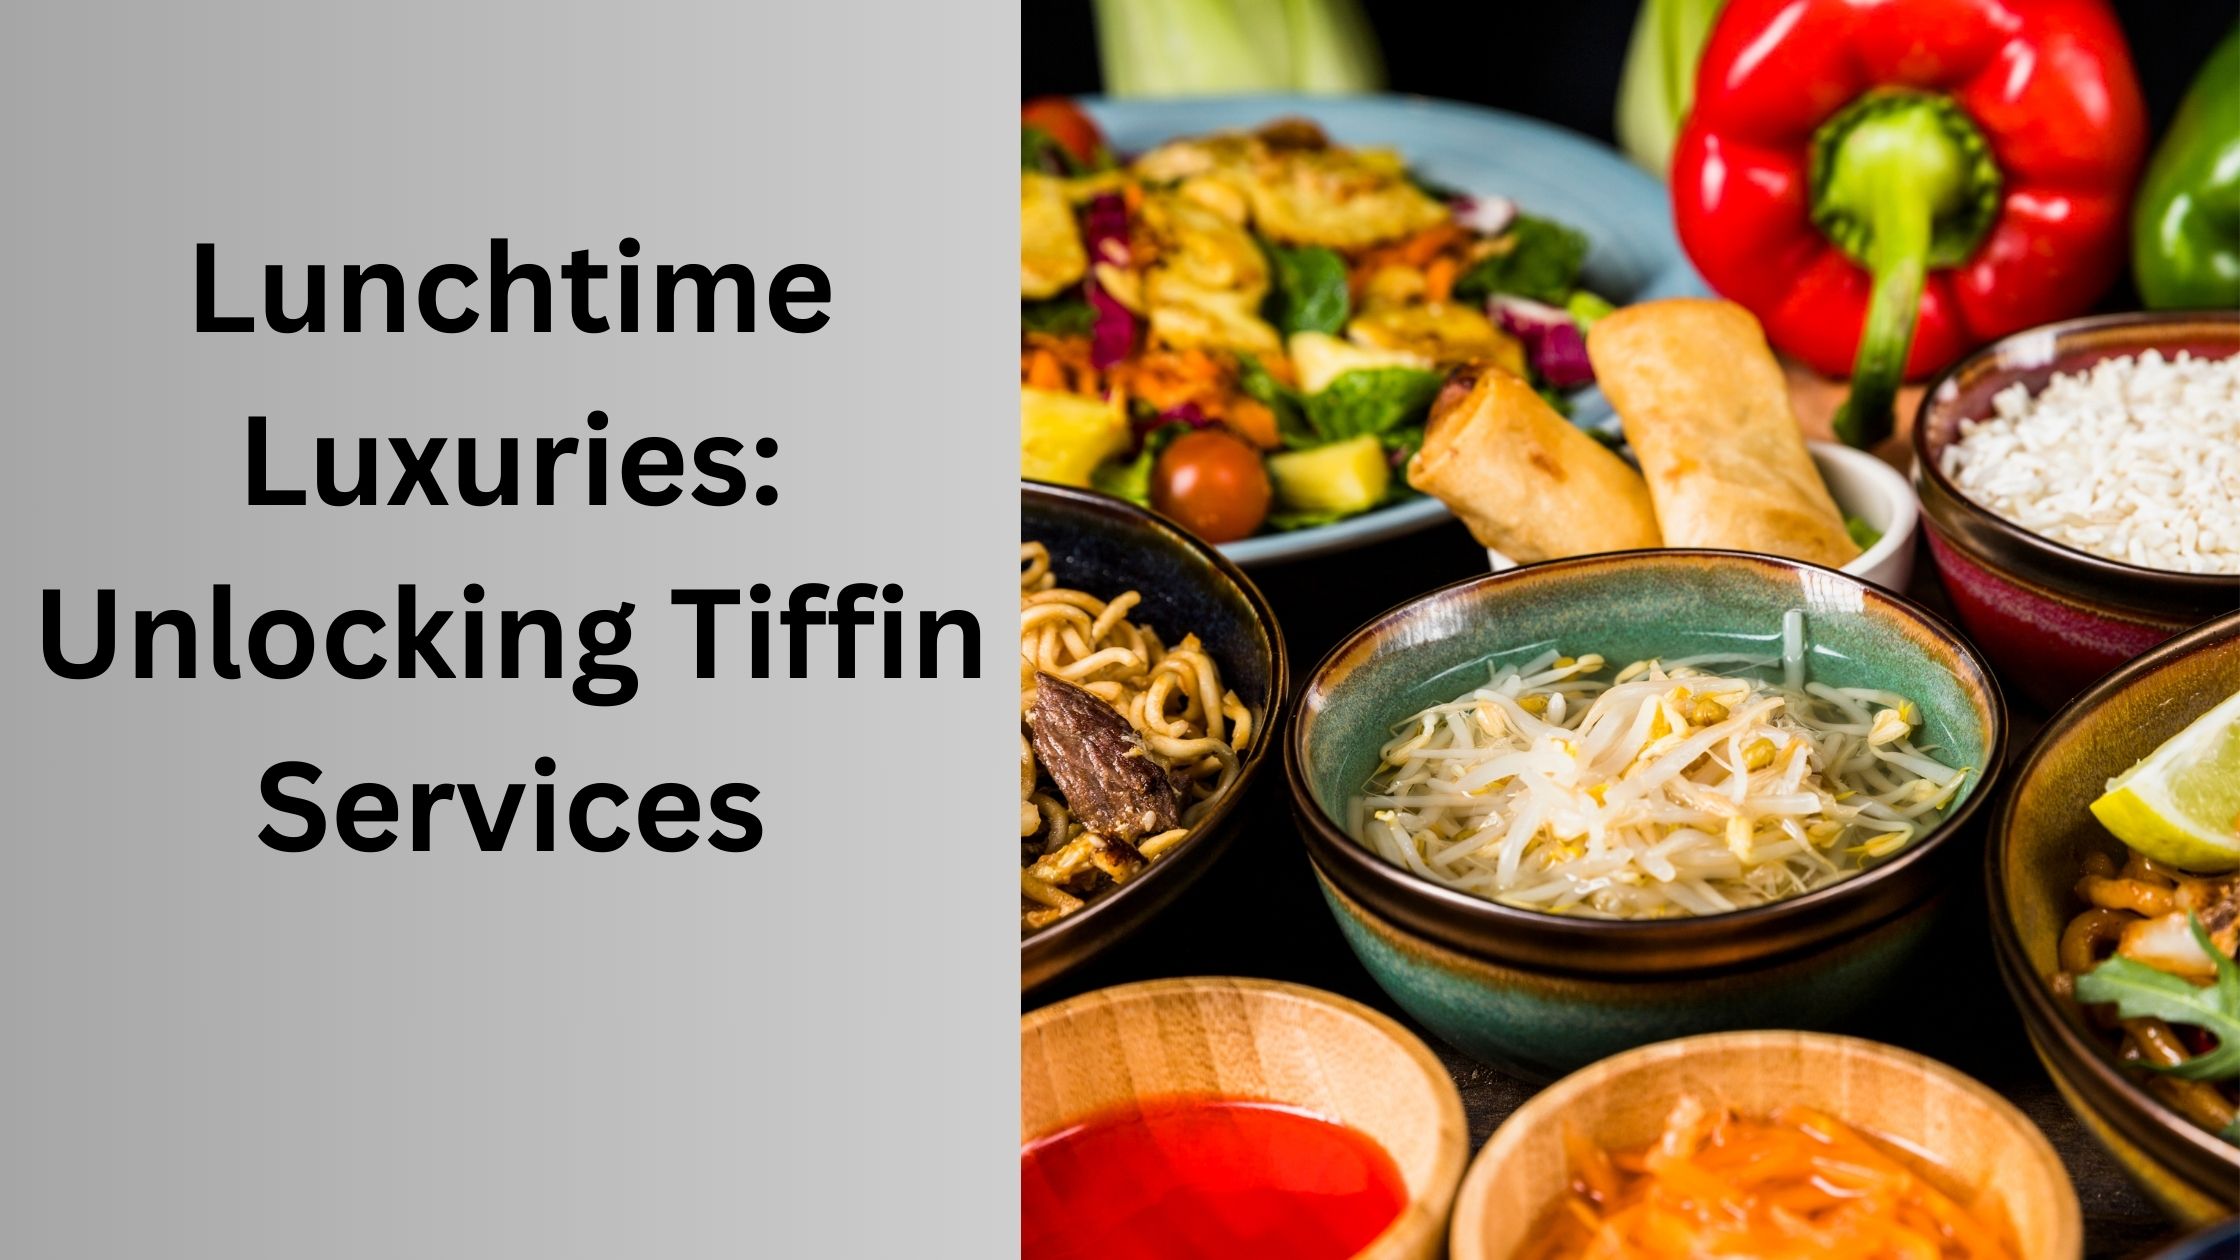 Lunchtime Luxuries: Unlocking Tiffin Services